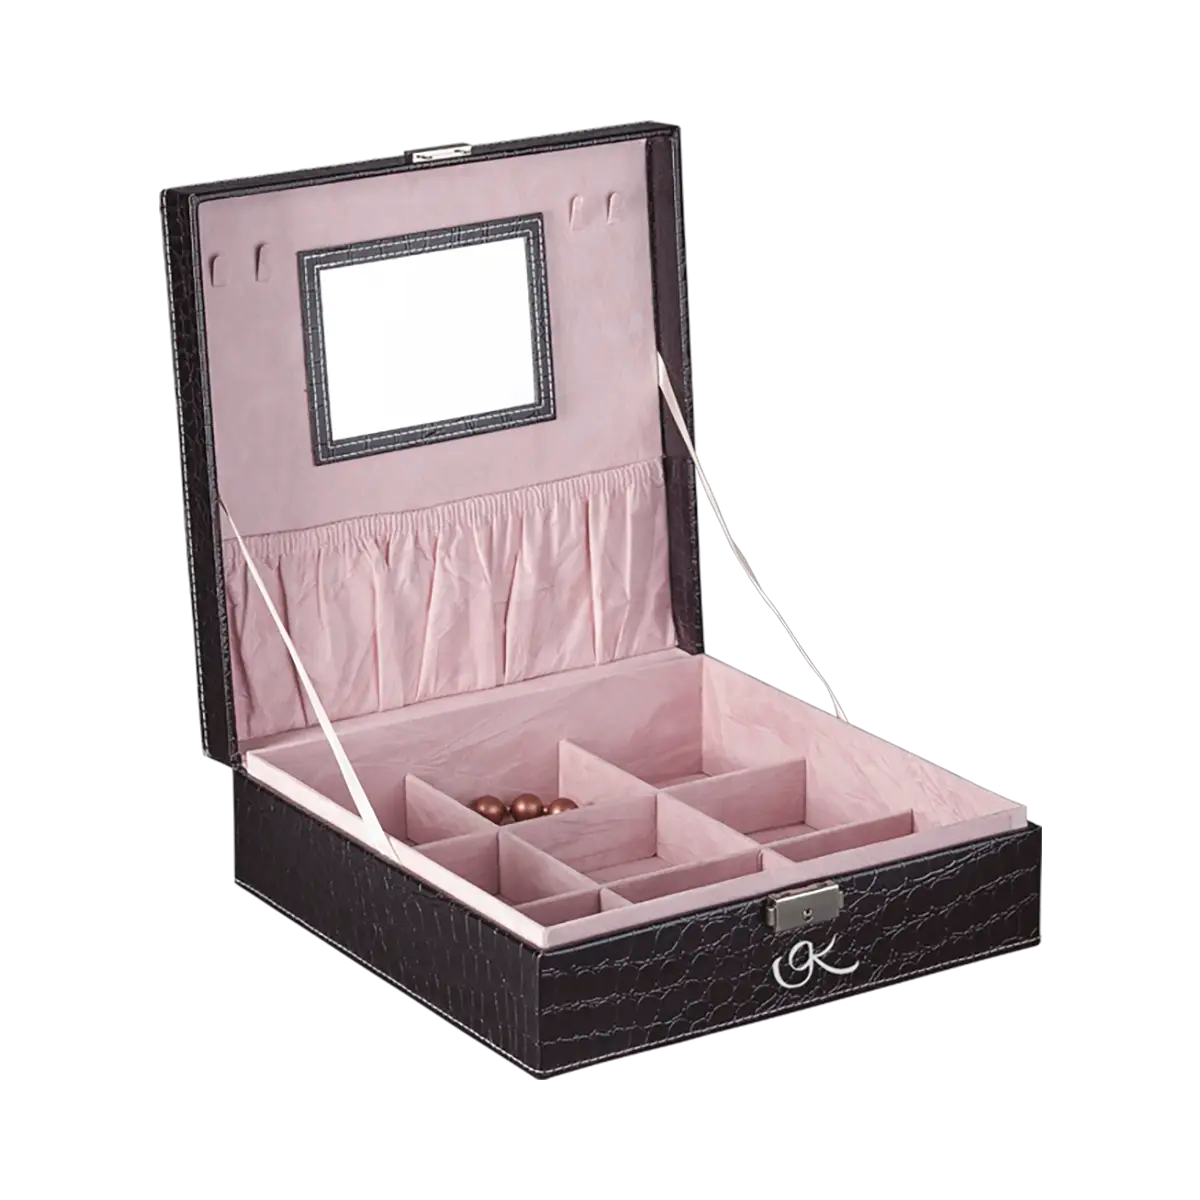 Large black vinyl snakeskin print with pink interior jewelry box for women. Shop in San Diego, CA.